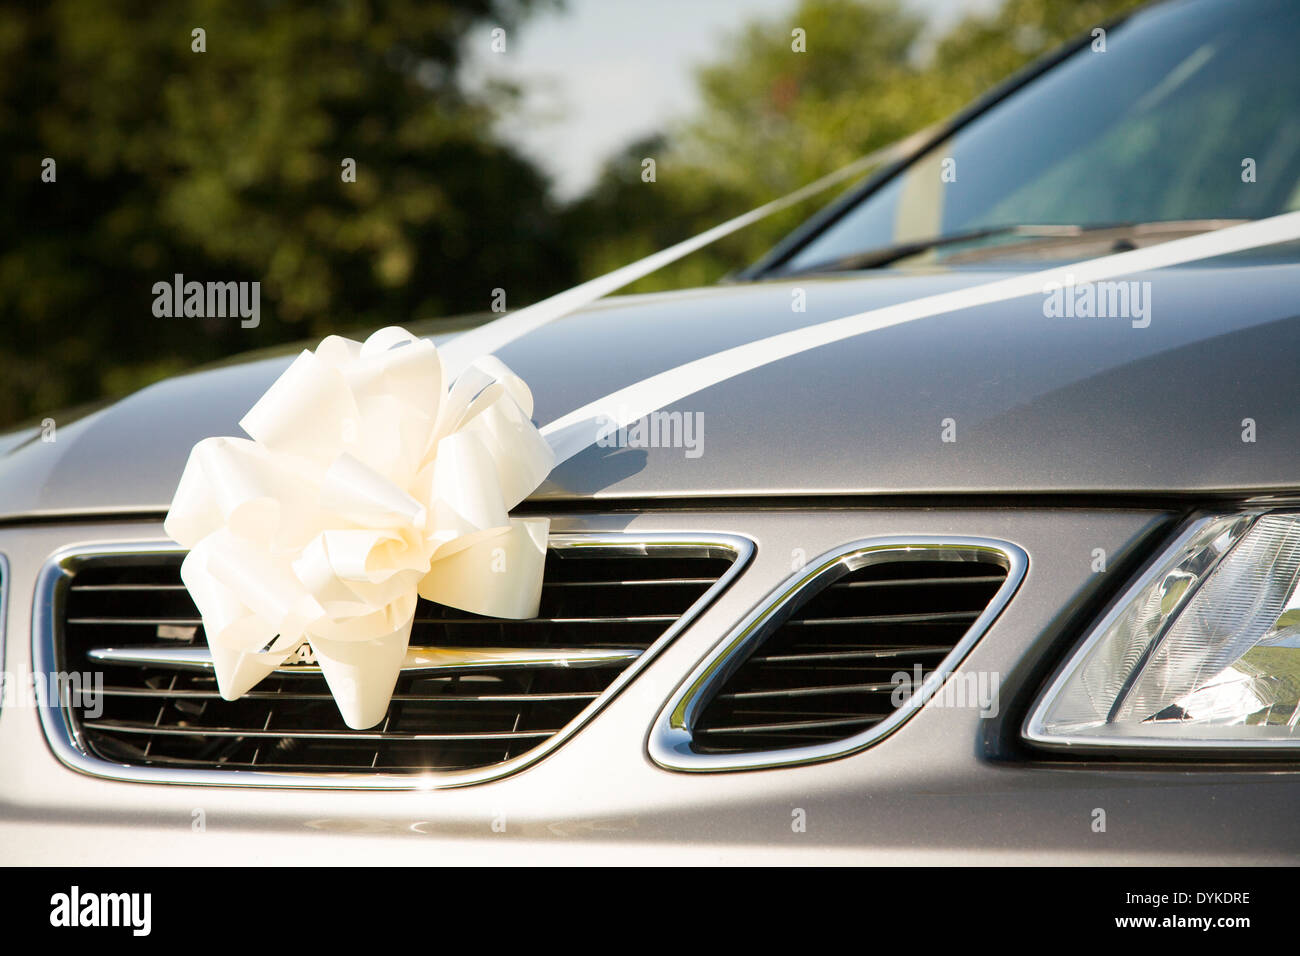 Silver wedding car with ribbons Stock Photo - Alamy